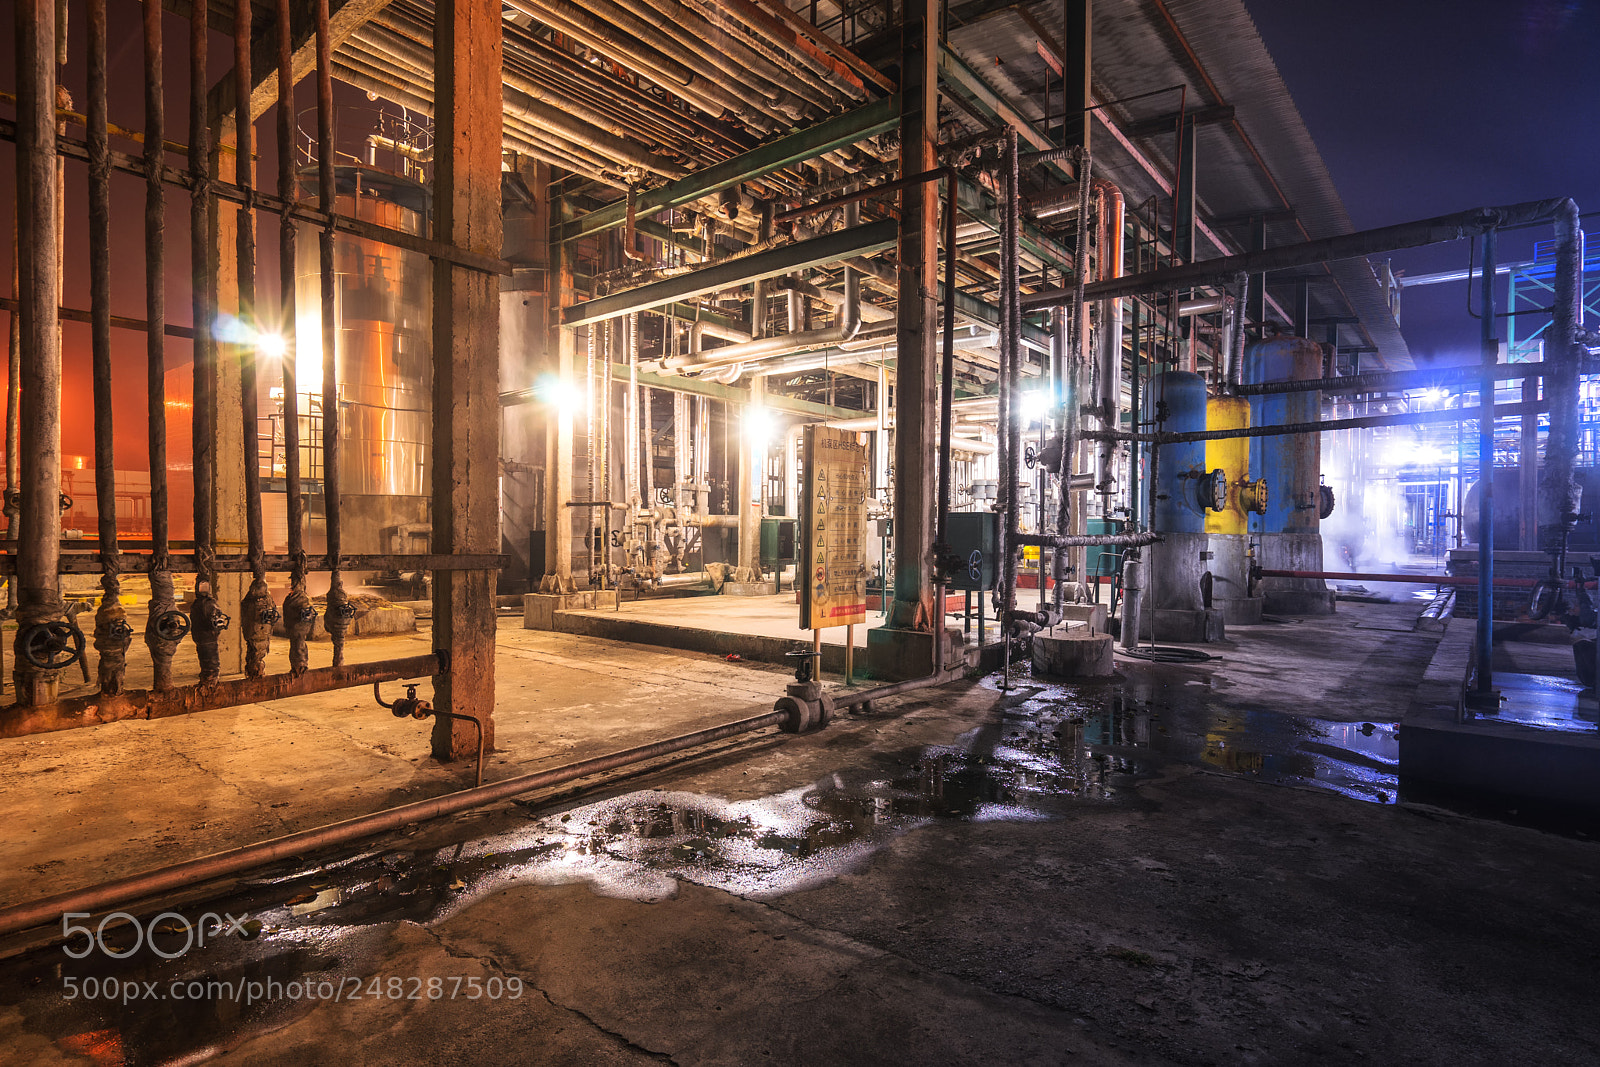 Sony a7 sample photo. Night oil refinery photography